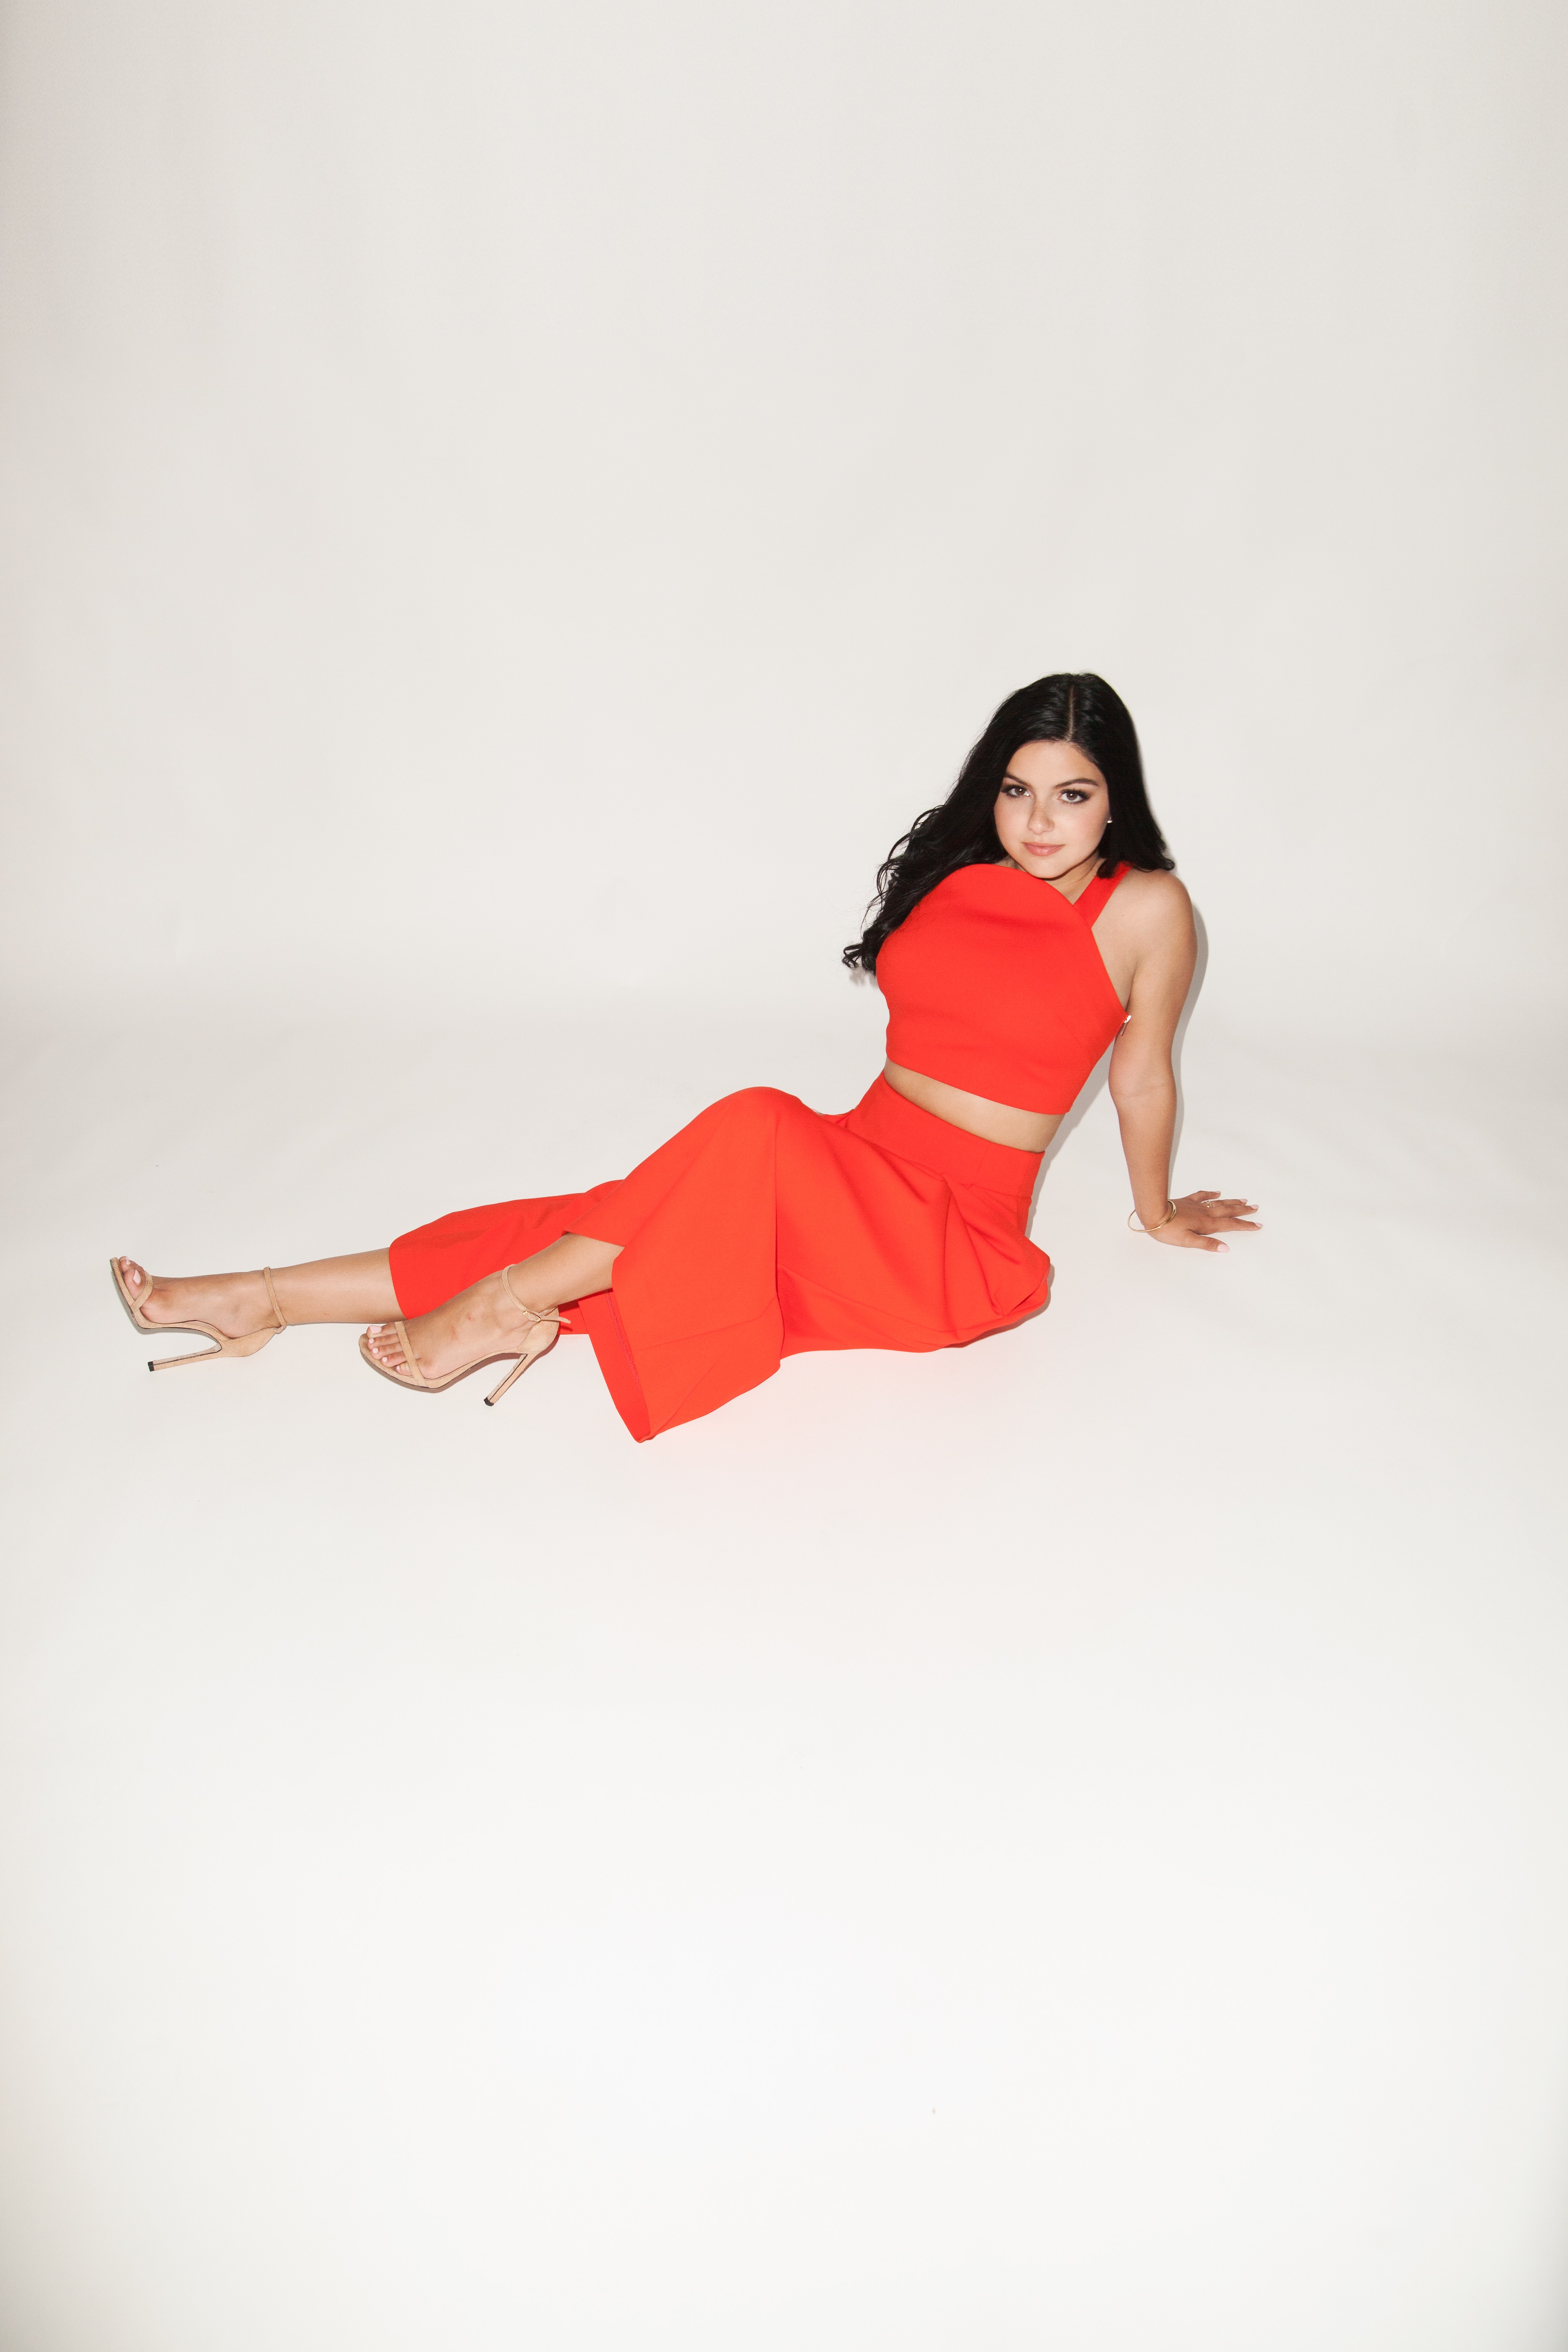 Ariel-Winter-breast-reduction-surgery